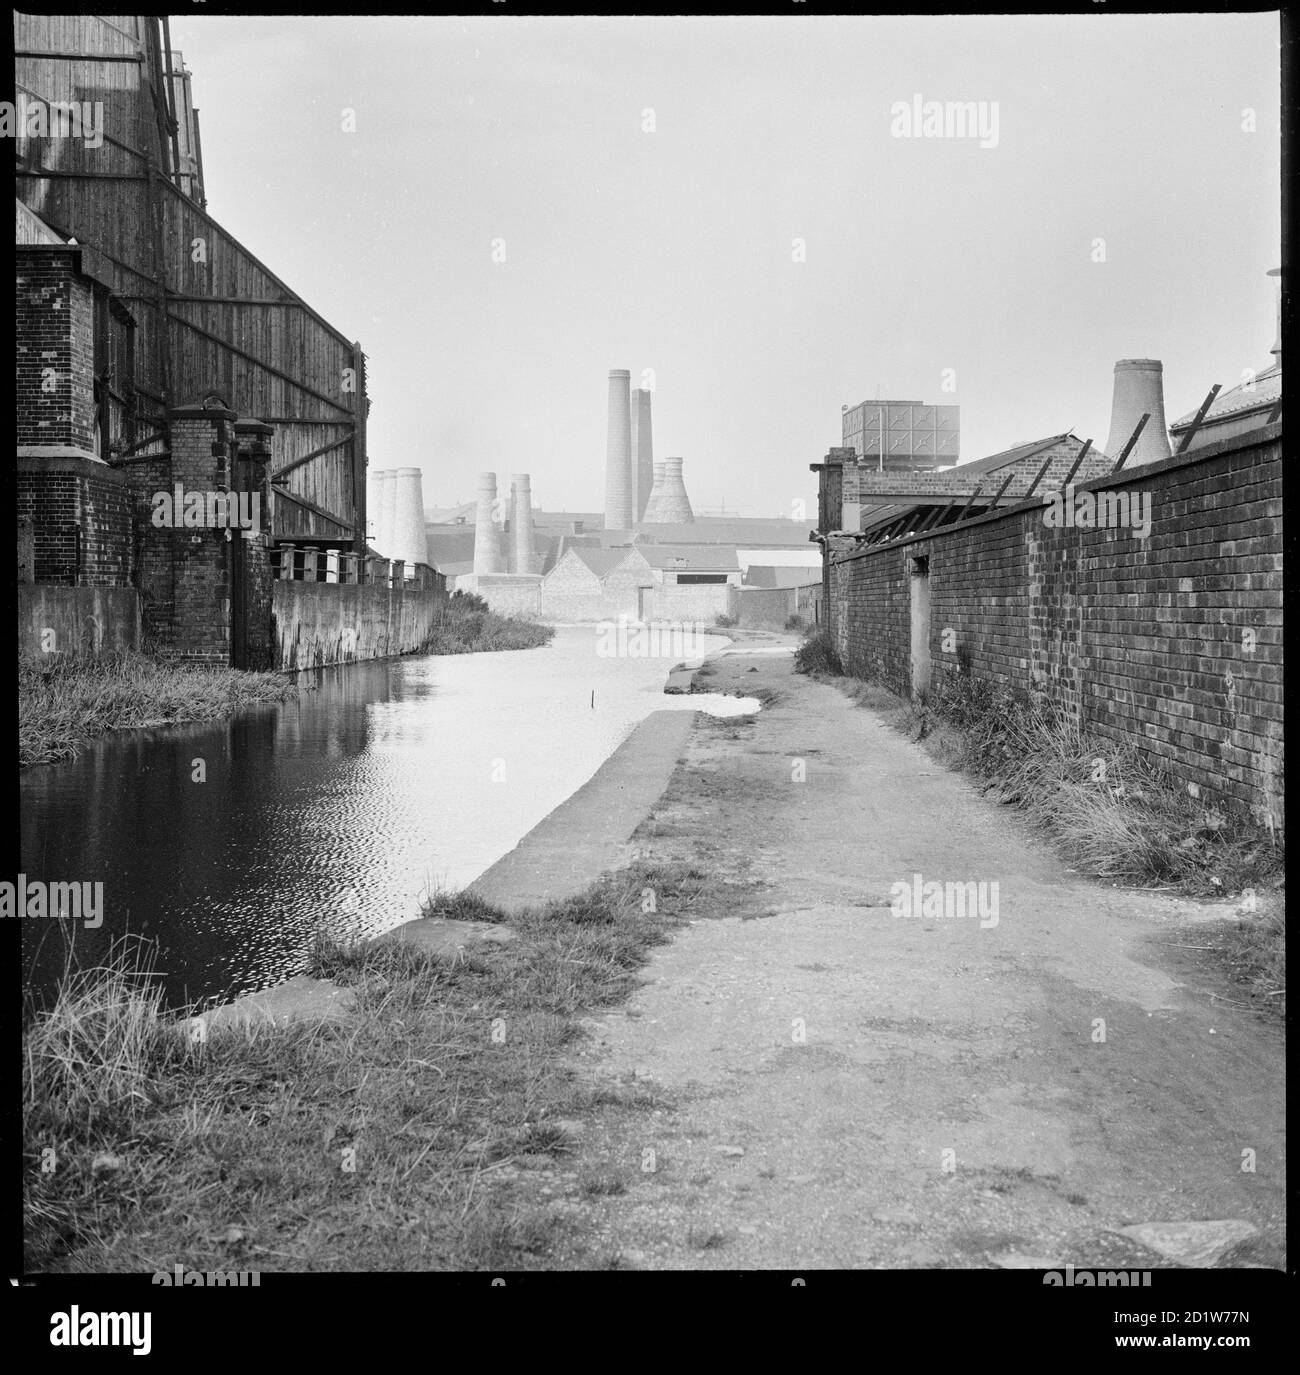 A view looking north along the Caldon Canal from a point opposite the Electricity Works with Trent Works and Westwood Mills in the background, Joiner's Square, Hanley, Stoke-on-Trent, Staffordshire, UK. Stock Photo